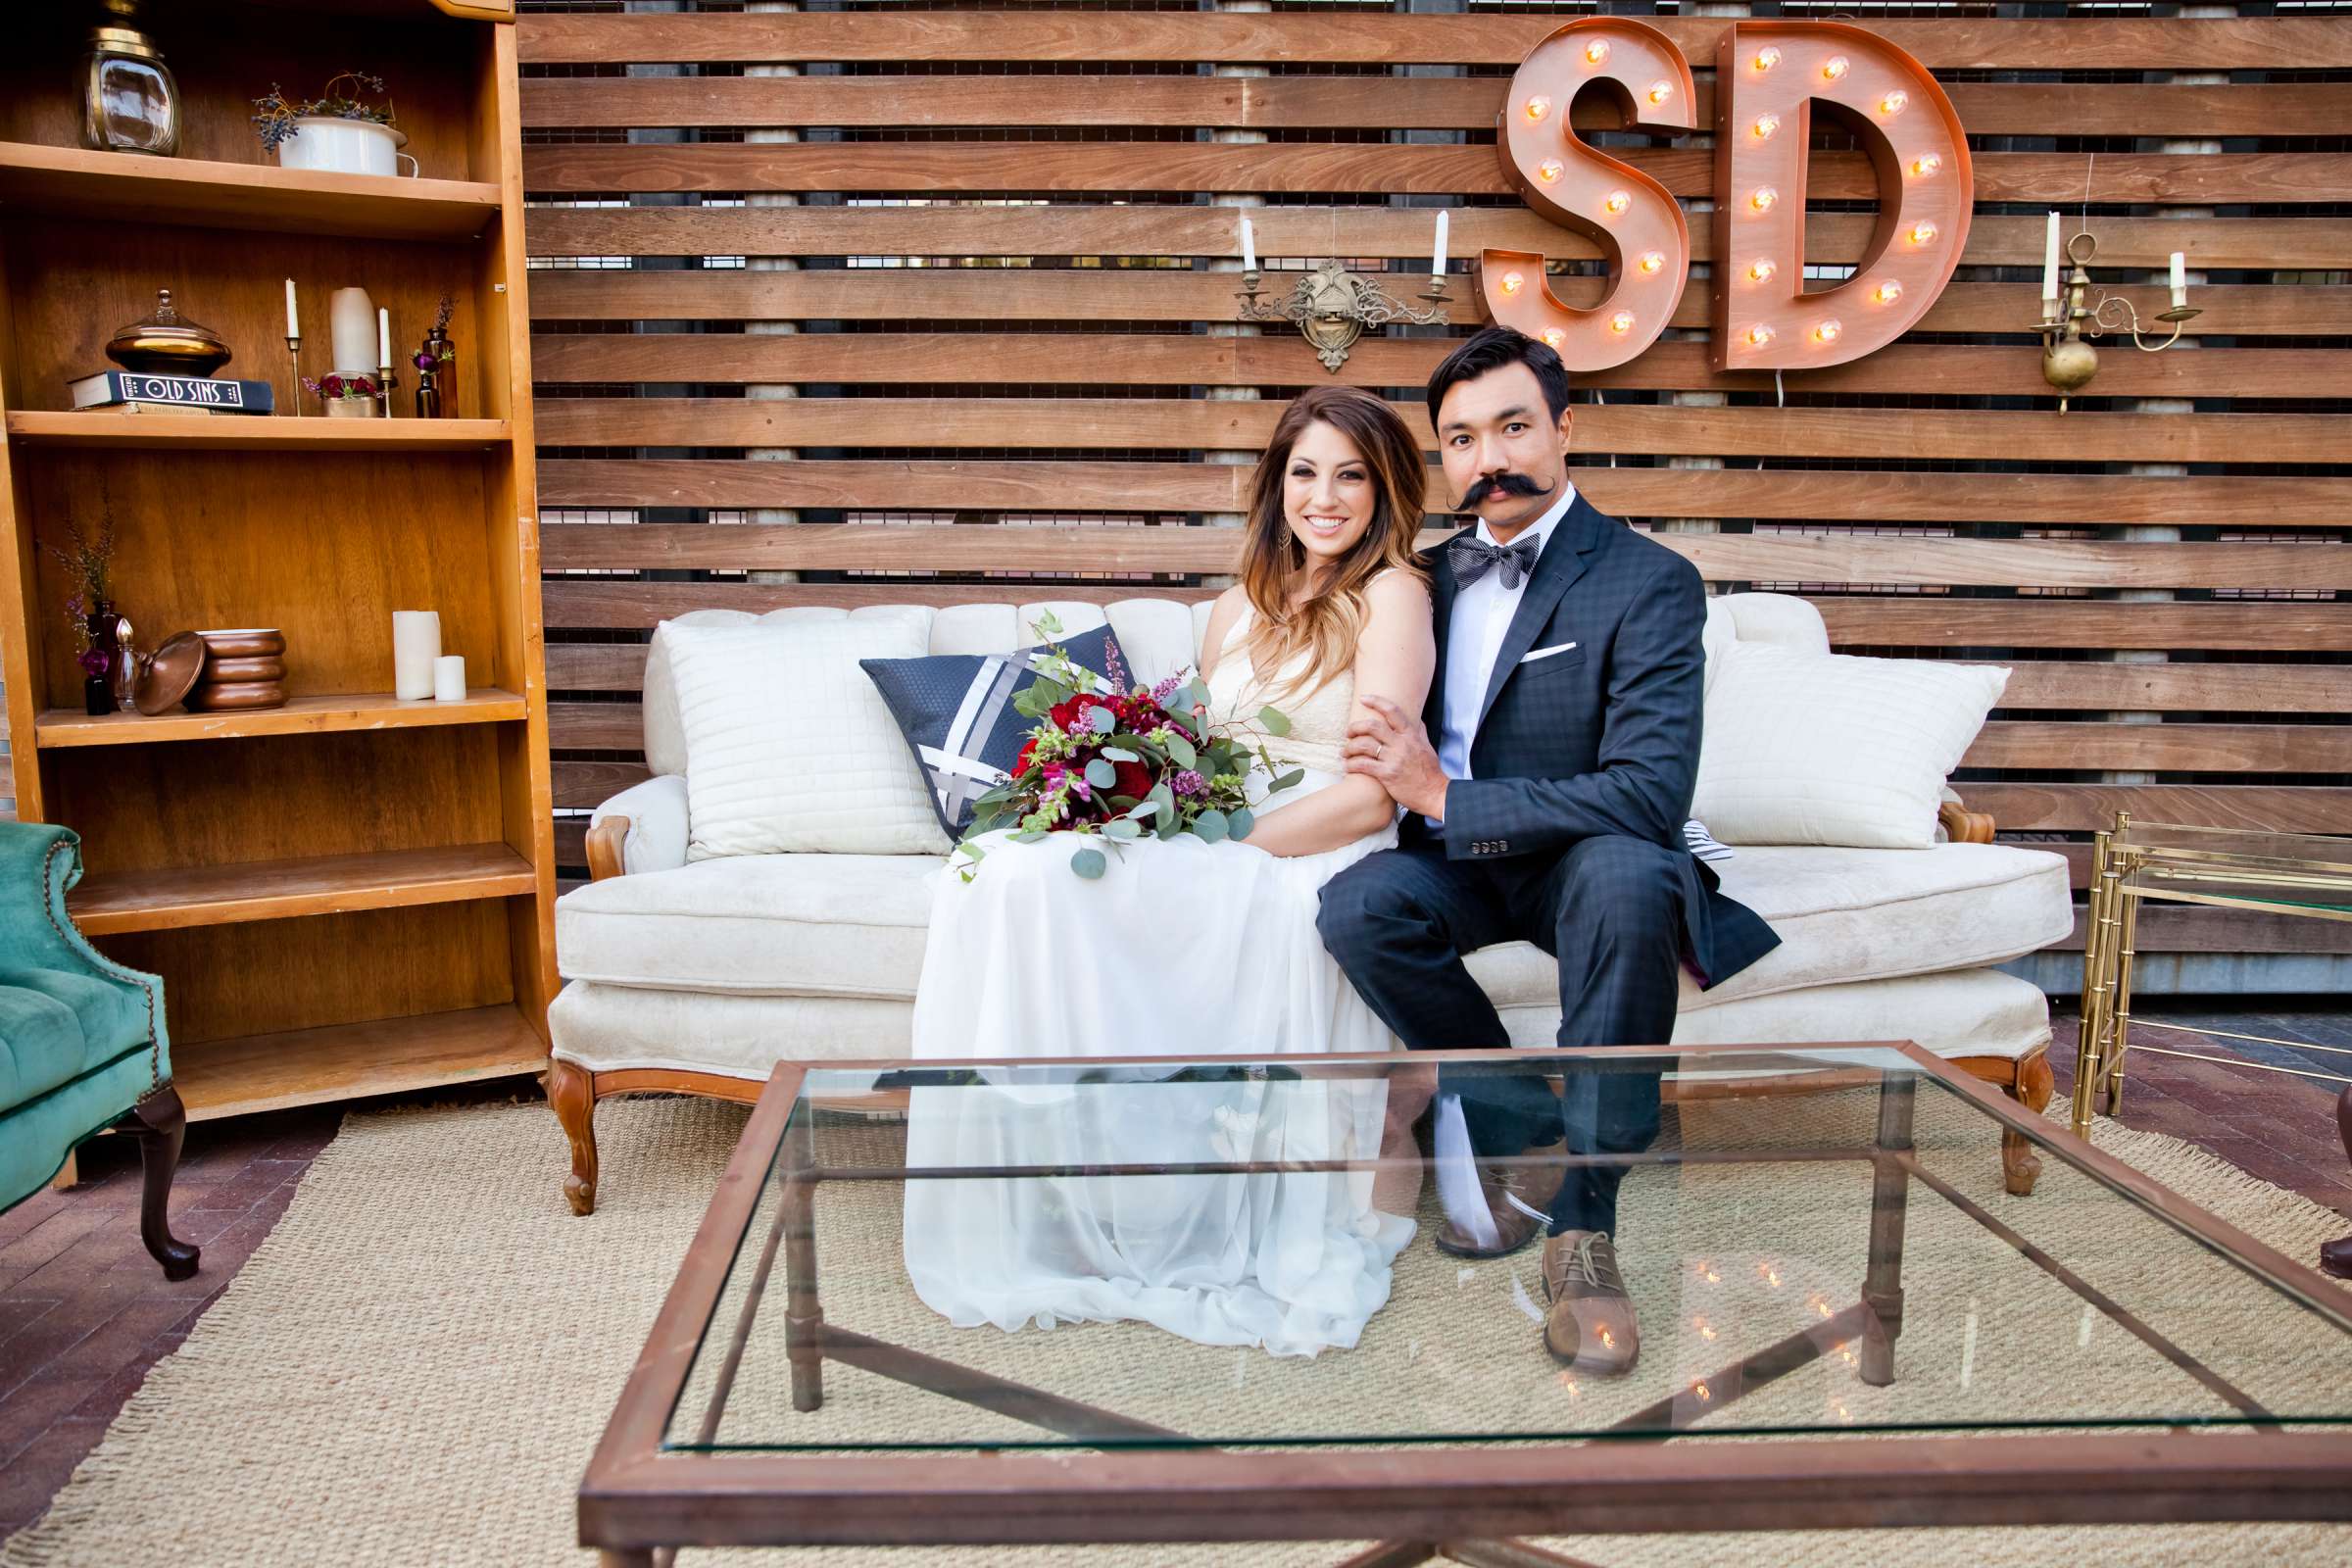 Wedding coordinated by Seven Stems Floral Design & Events, Stylish Editorial Wedding Photo #191166 by True Photography